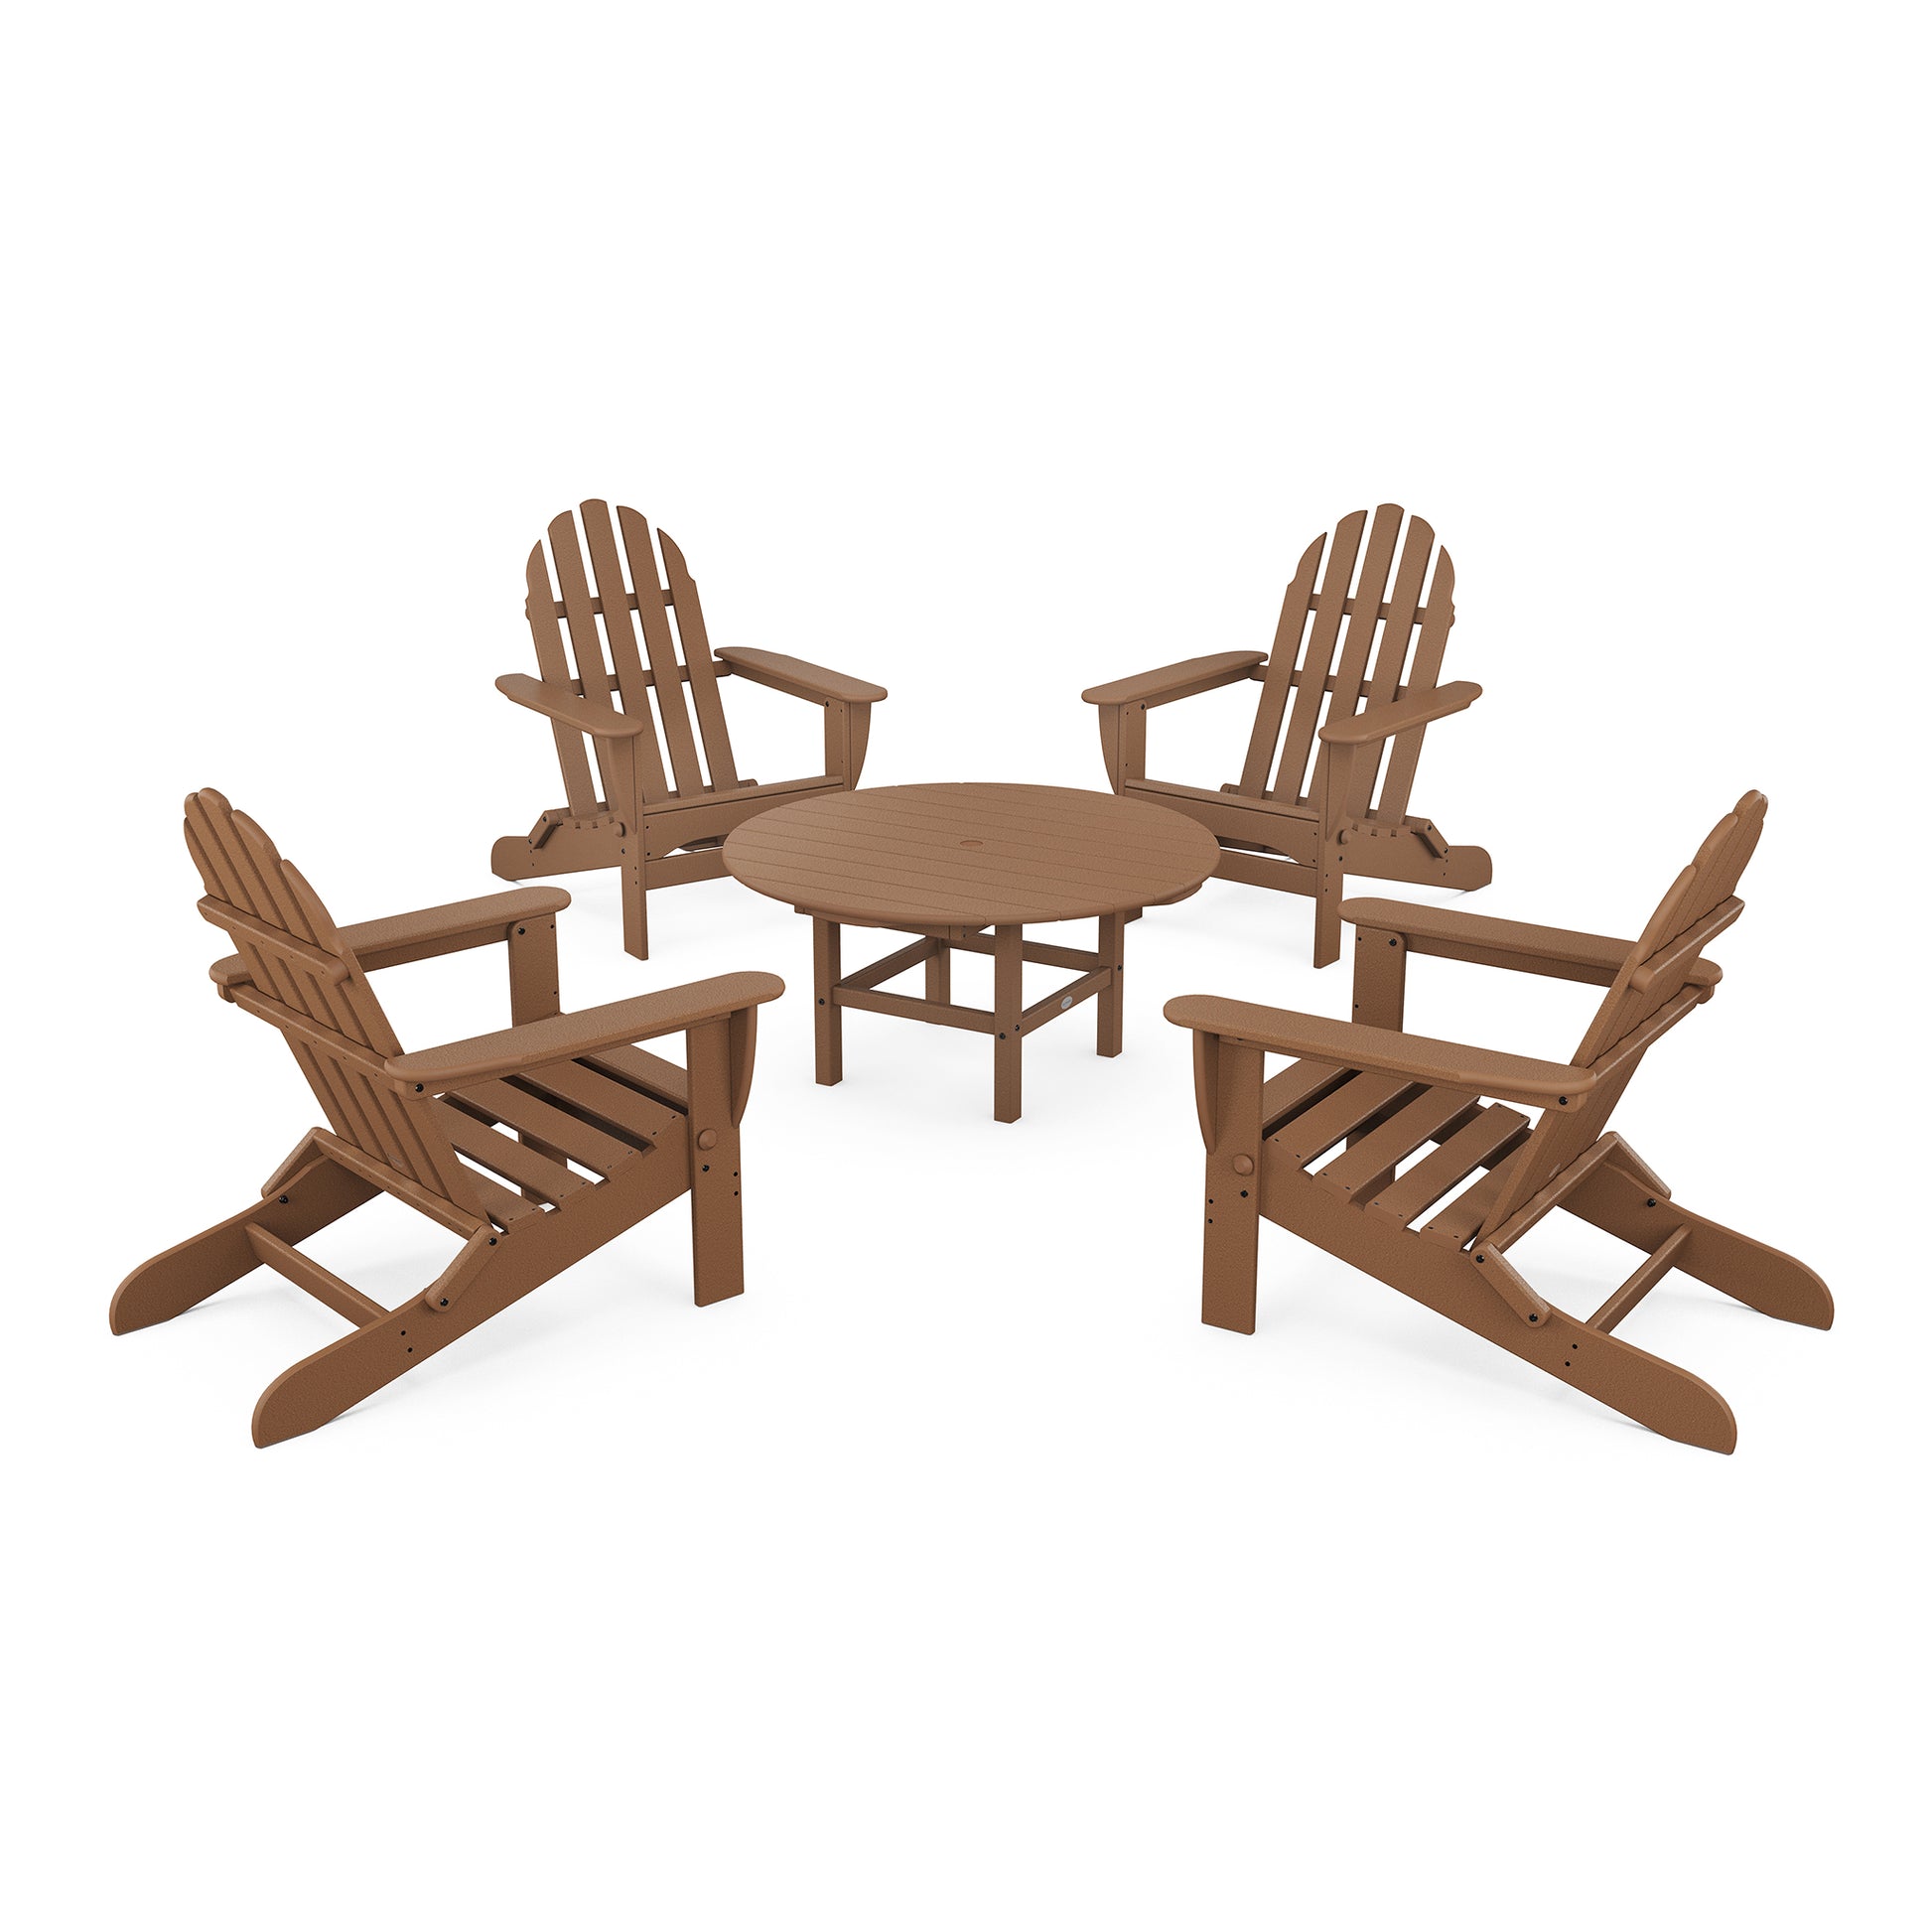 Four brown POLYWOOD Classic Folding Adirondack chairs arranged around a small, round wooden table on a plain white background.